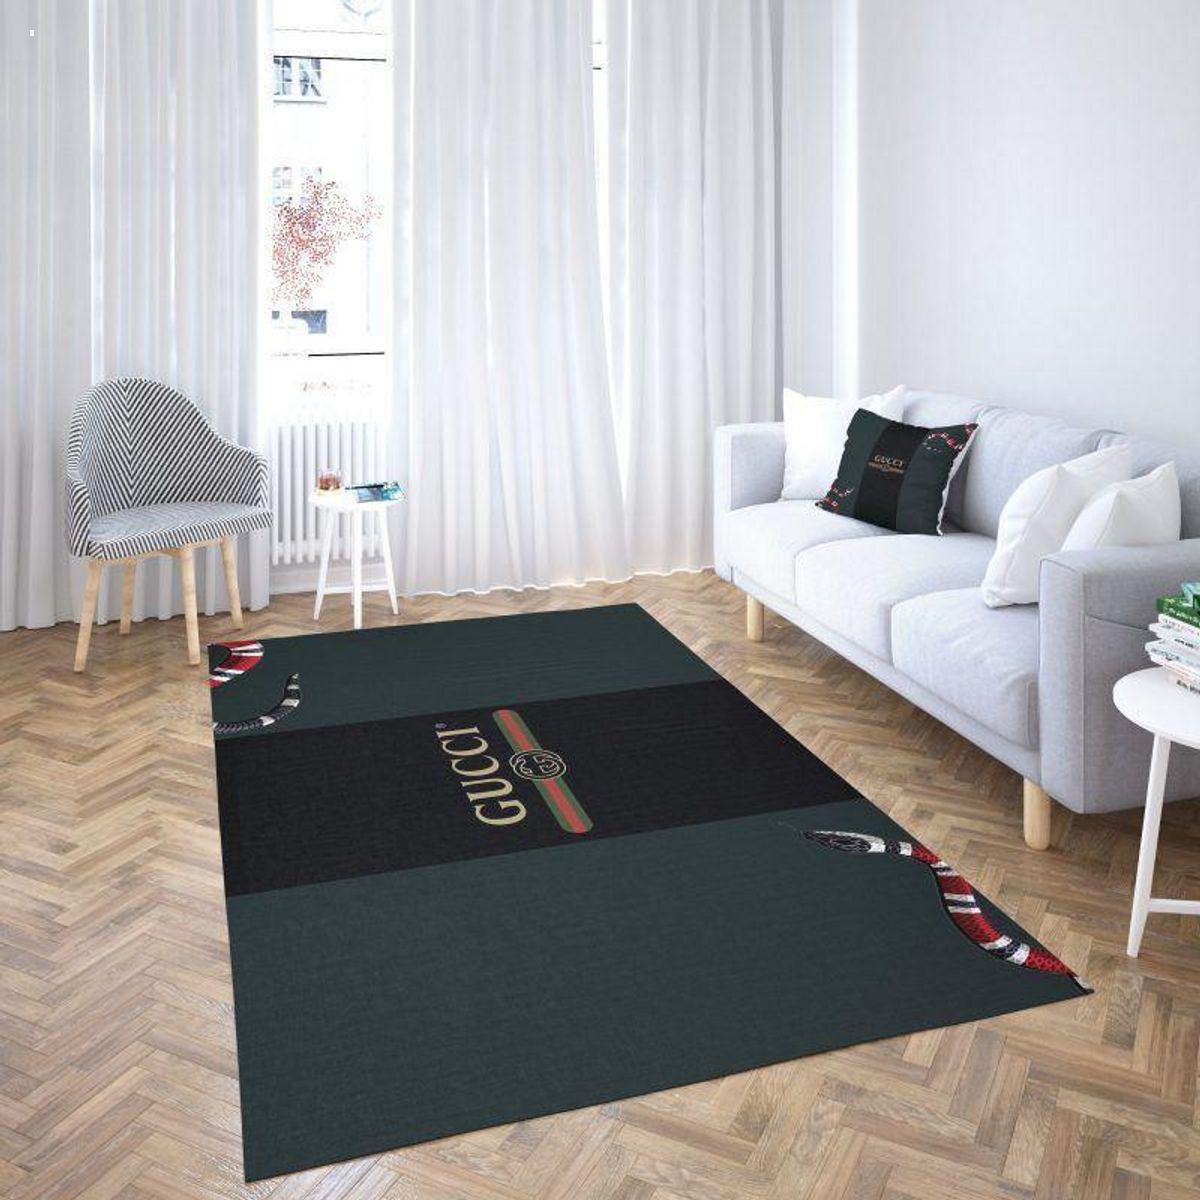 Gucci Dark Color Luxury Brand Carpet Rug Limited Edition